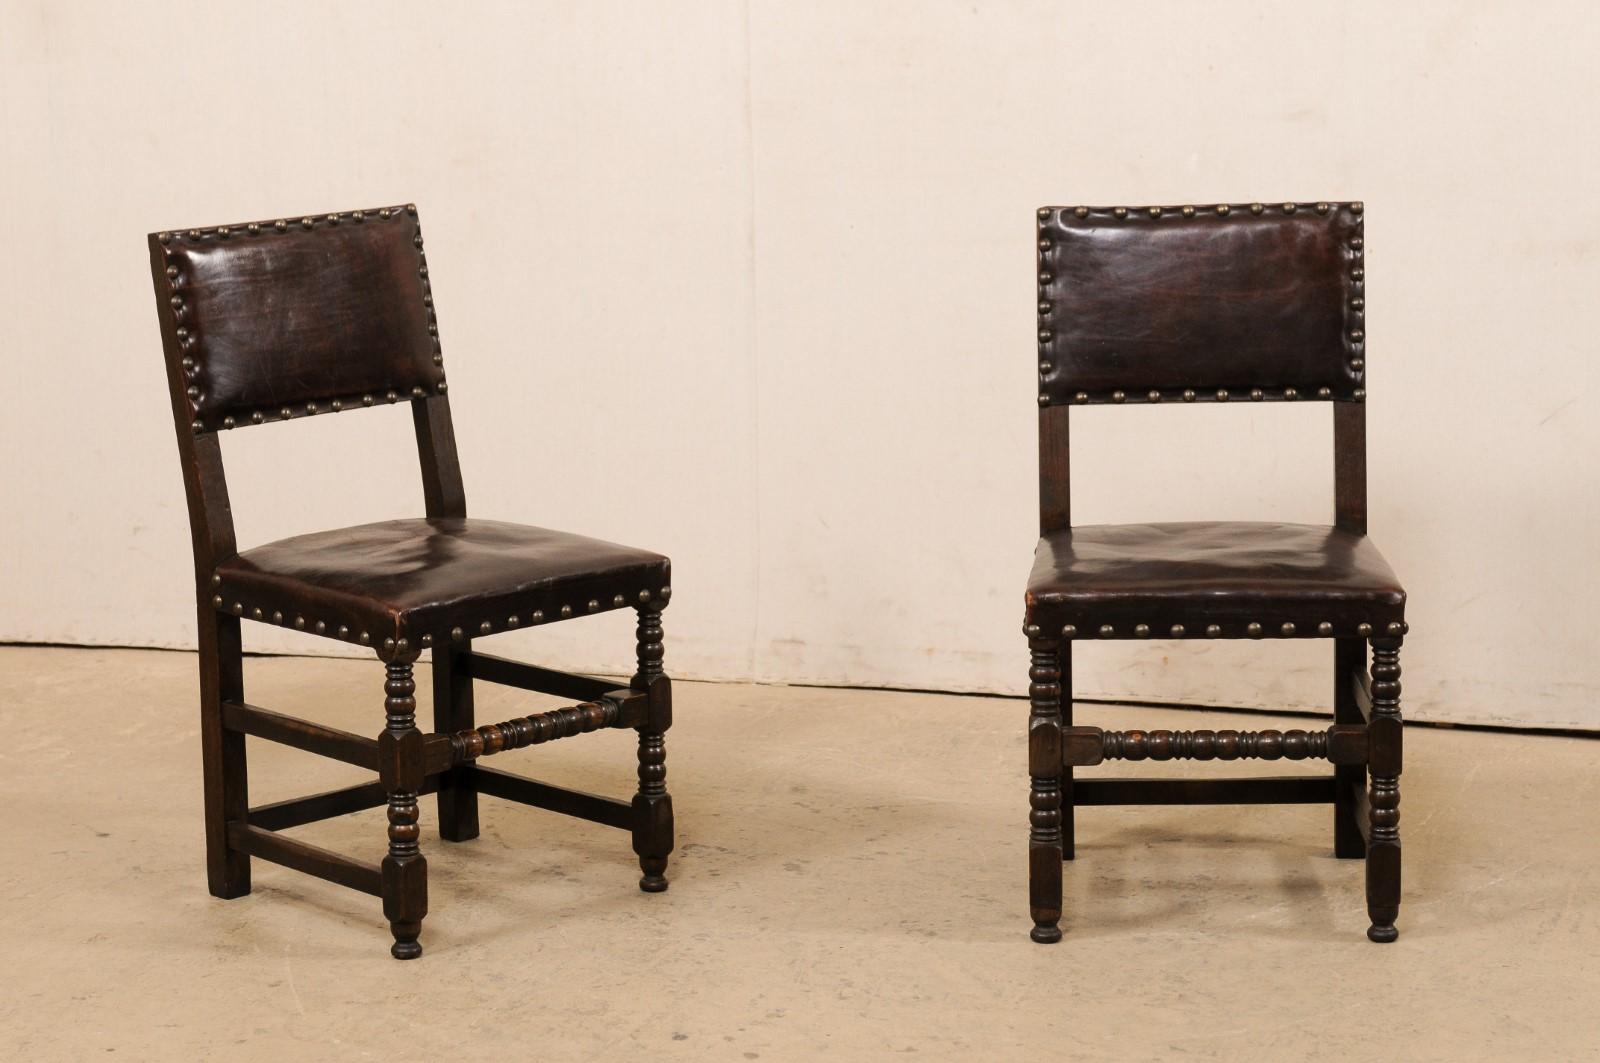 A French set of six carved-wood side chairs with leather seat and backs. These vintage chairs from France each feature their original leather upholstered back-rest and seat, with nail head trim adorning and outlining the perimeters, and presented